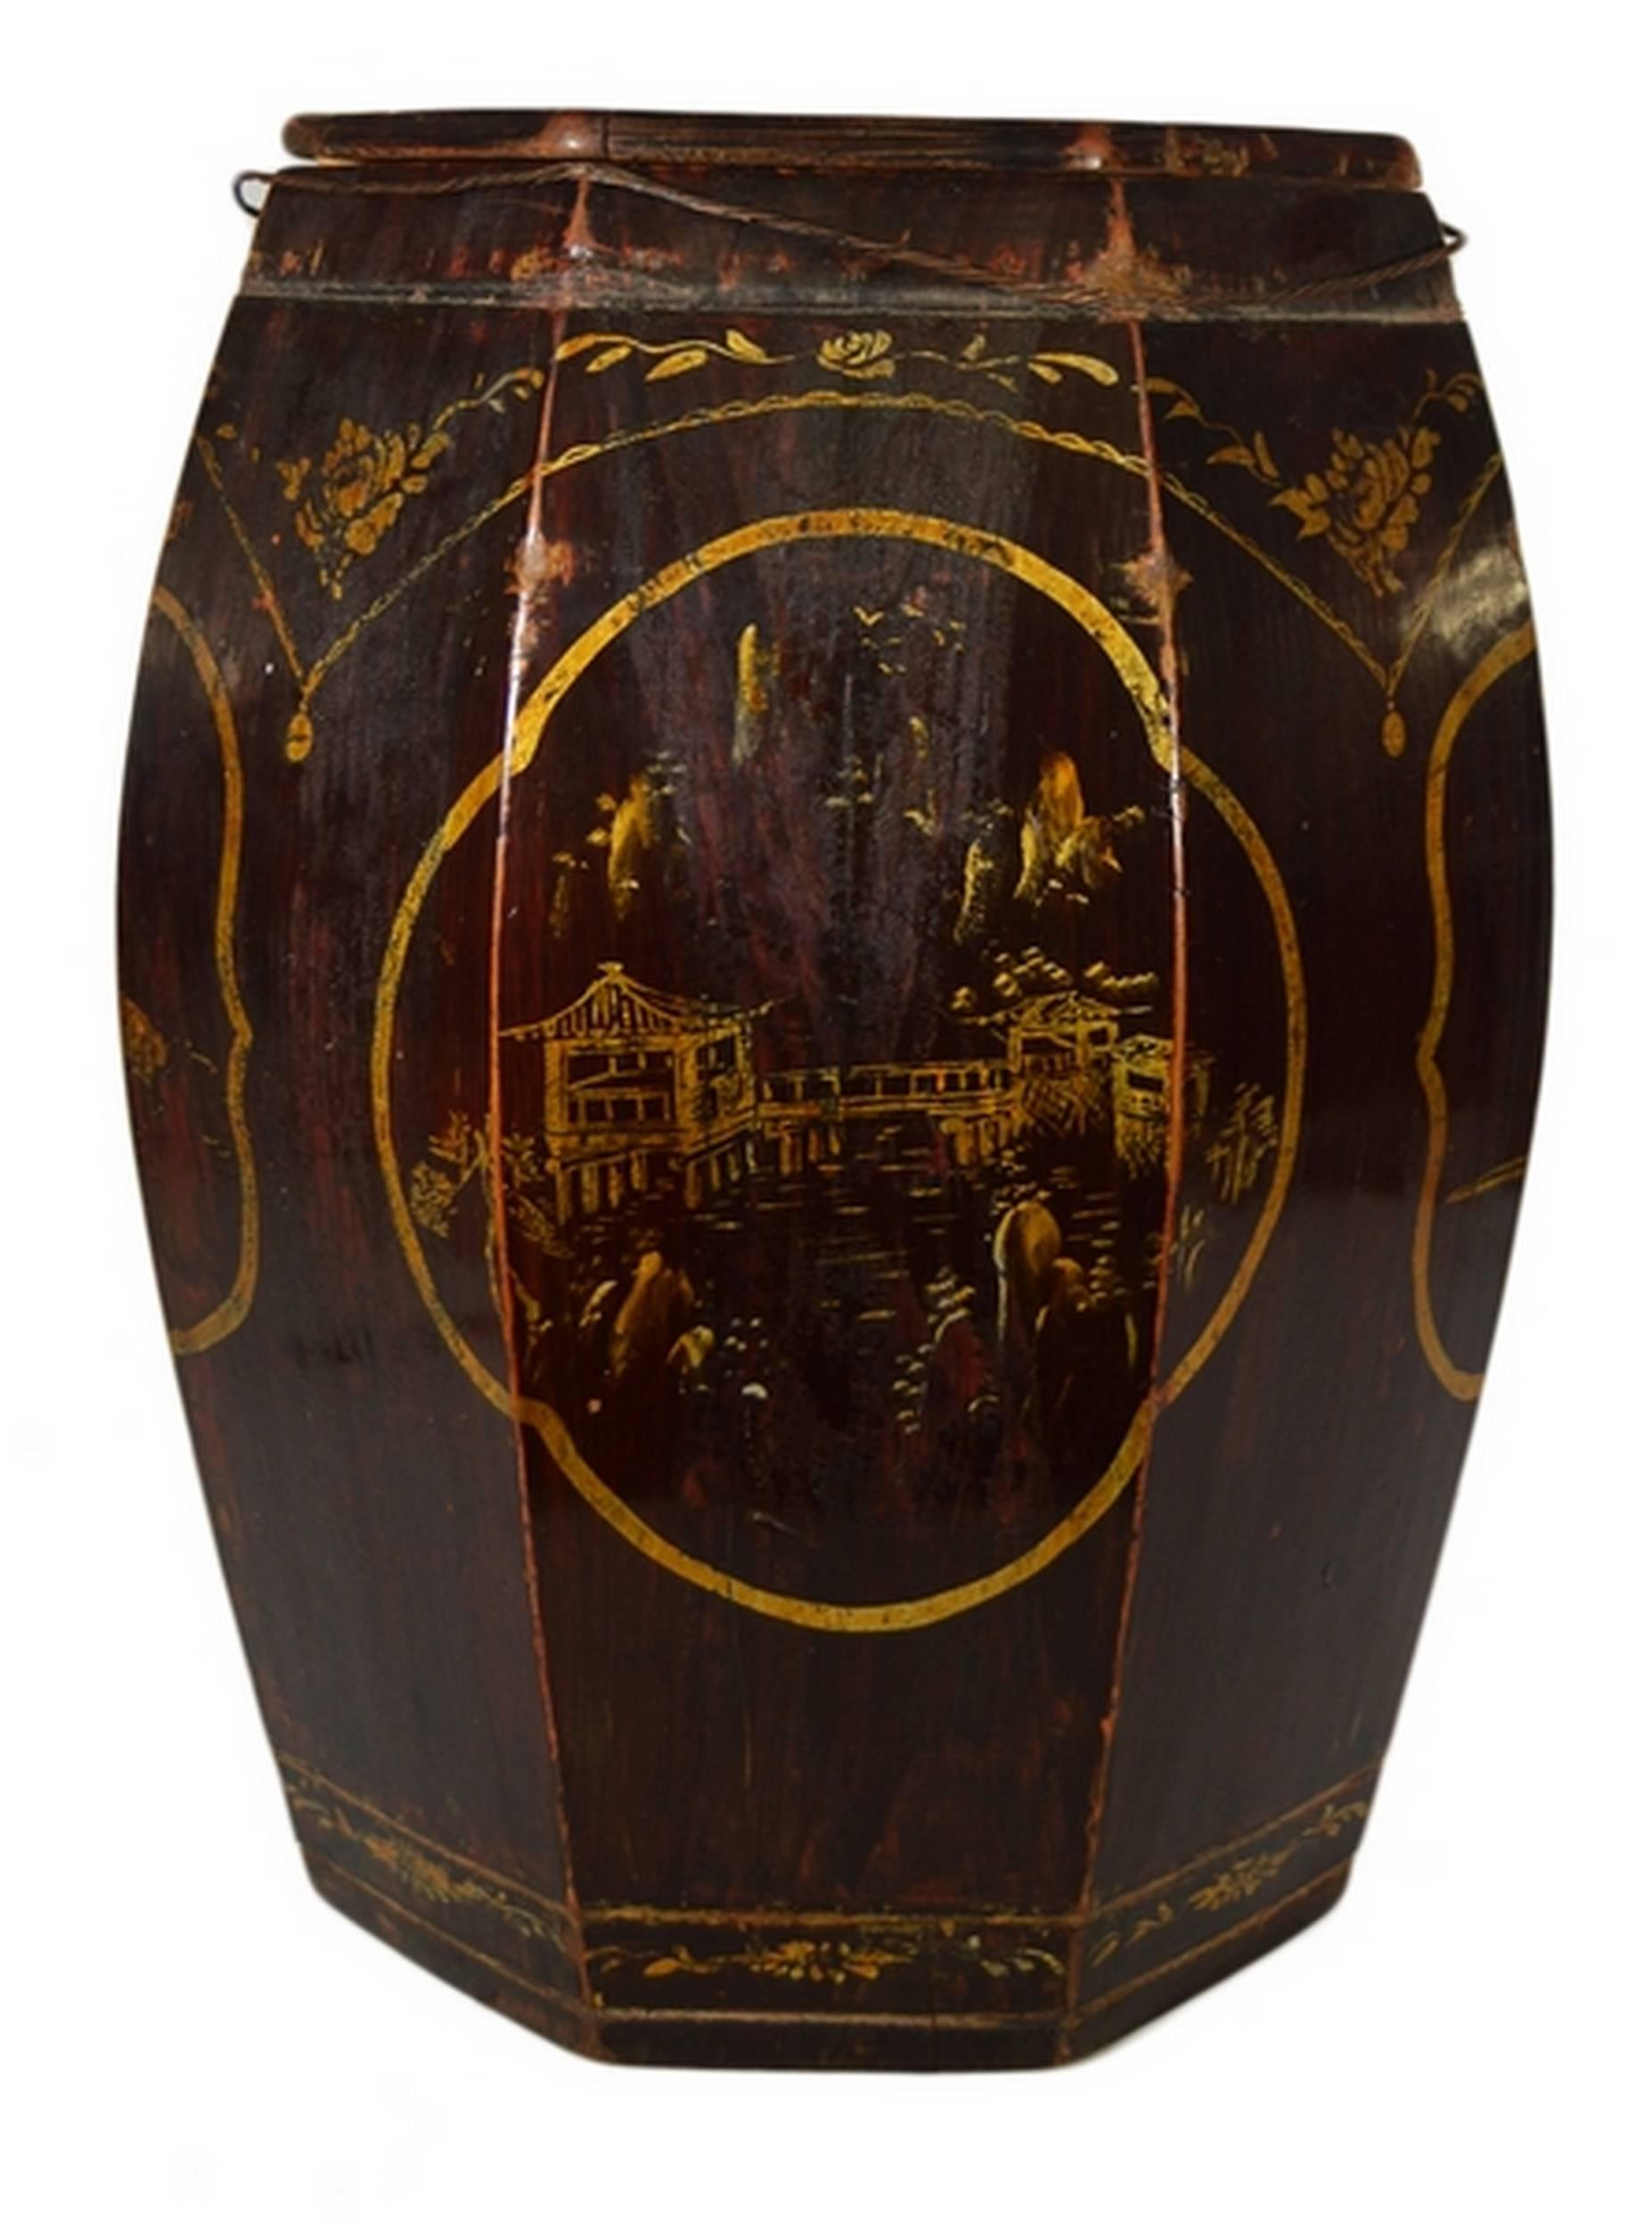 Wood Hand-Painted Grain Storage Barrel with Medallions from, China, 19th Century